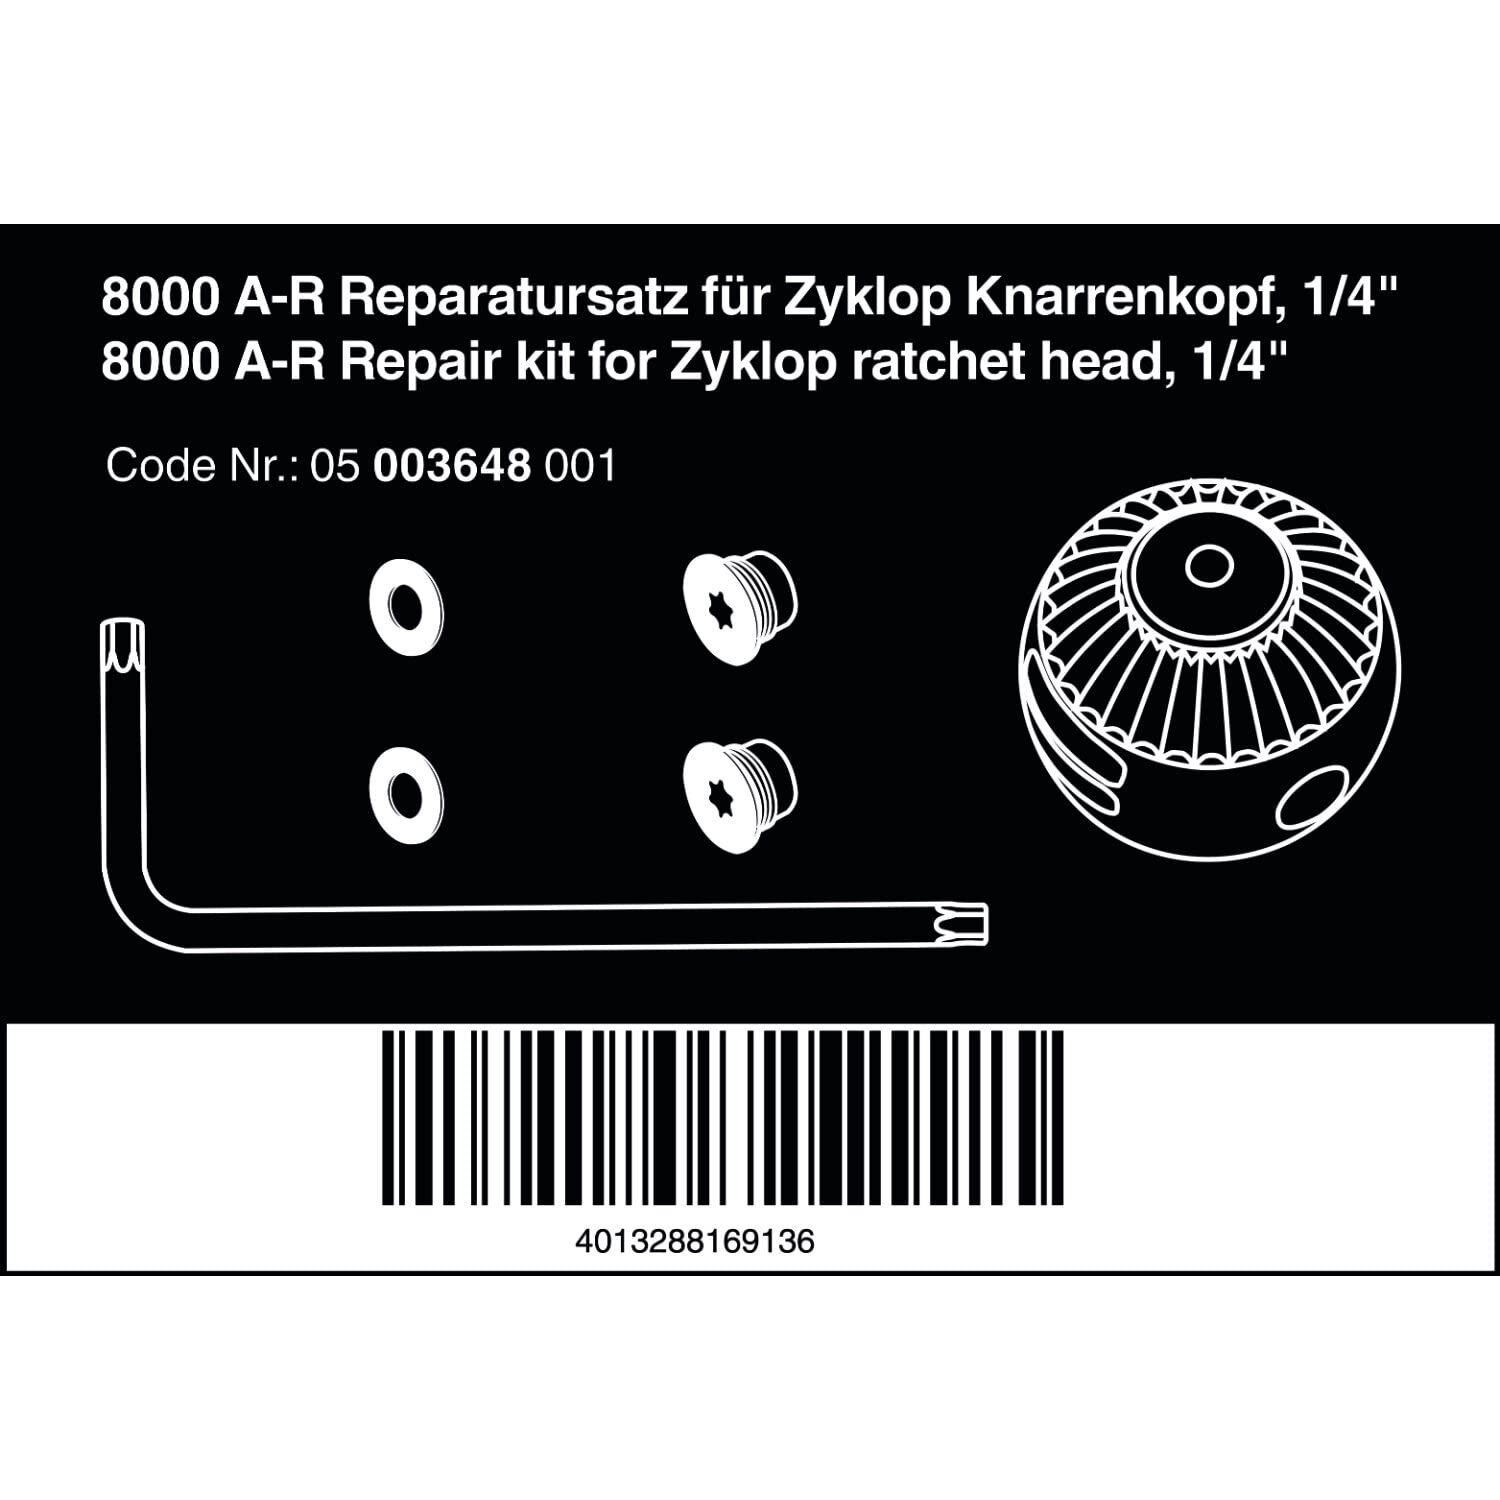 Wera 05003648001 4013288169136 Repair kit 8000 A-R for Zyklop, Silver